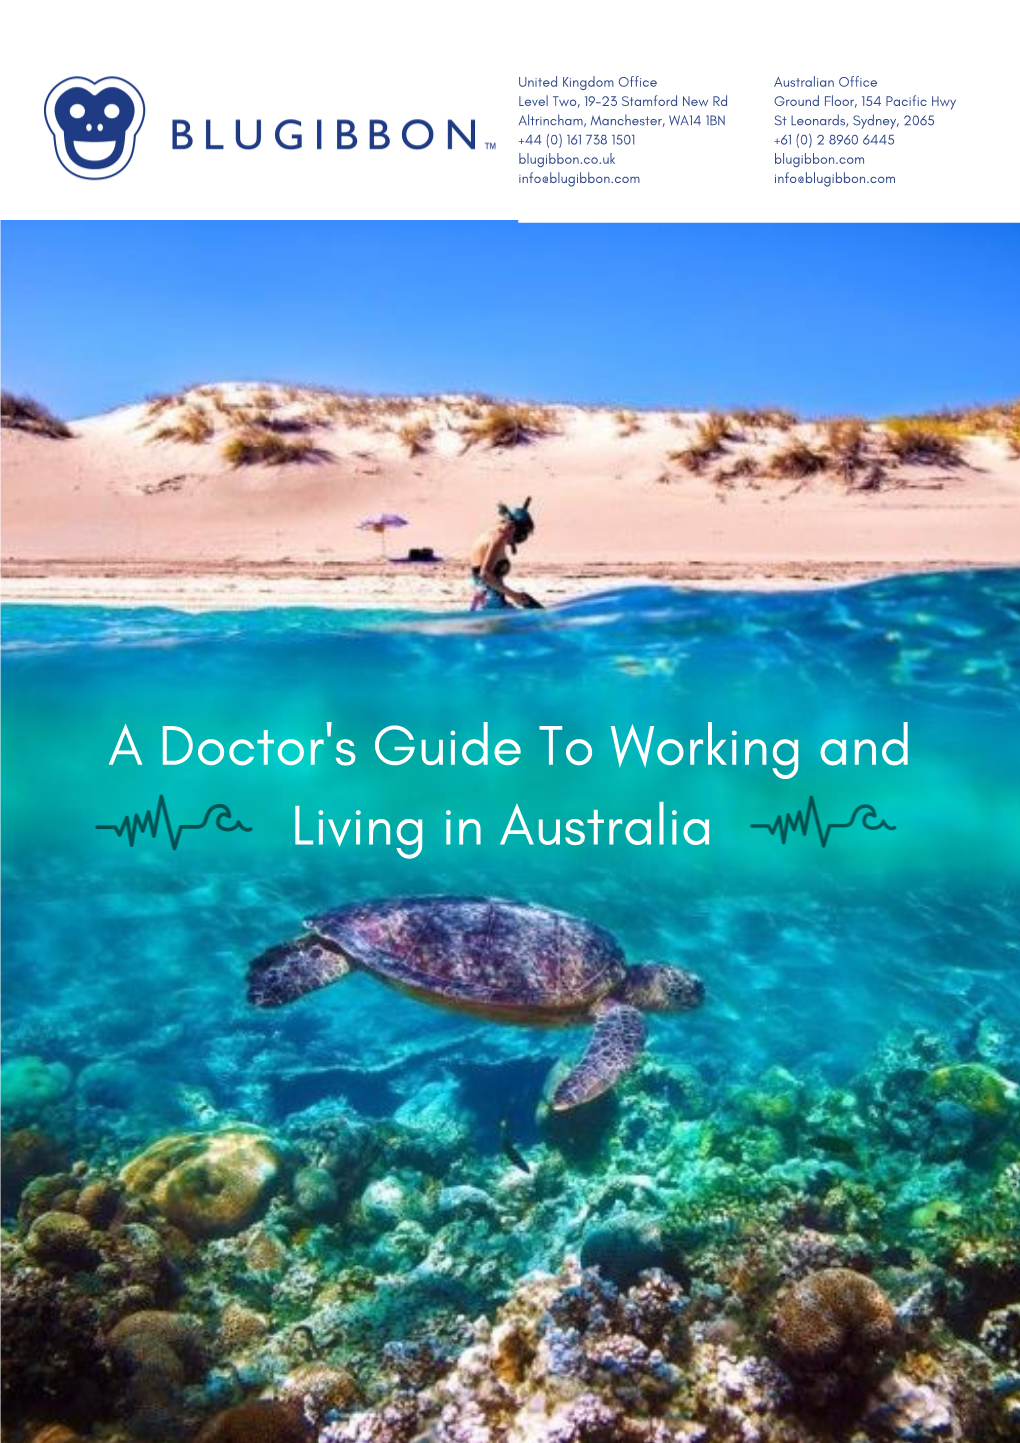 A Doctor's Guide to Working and Living in Australia